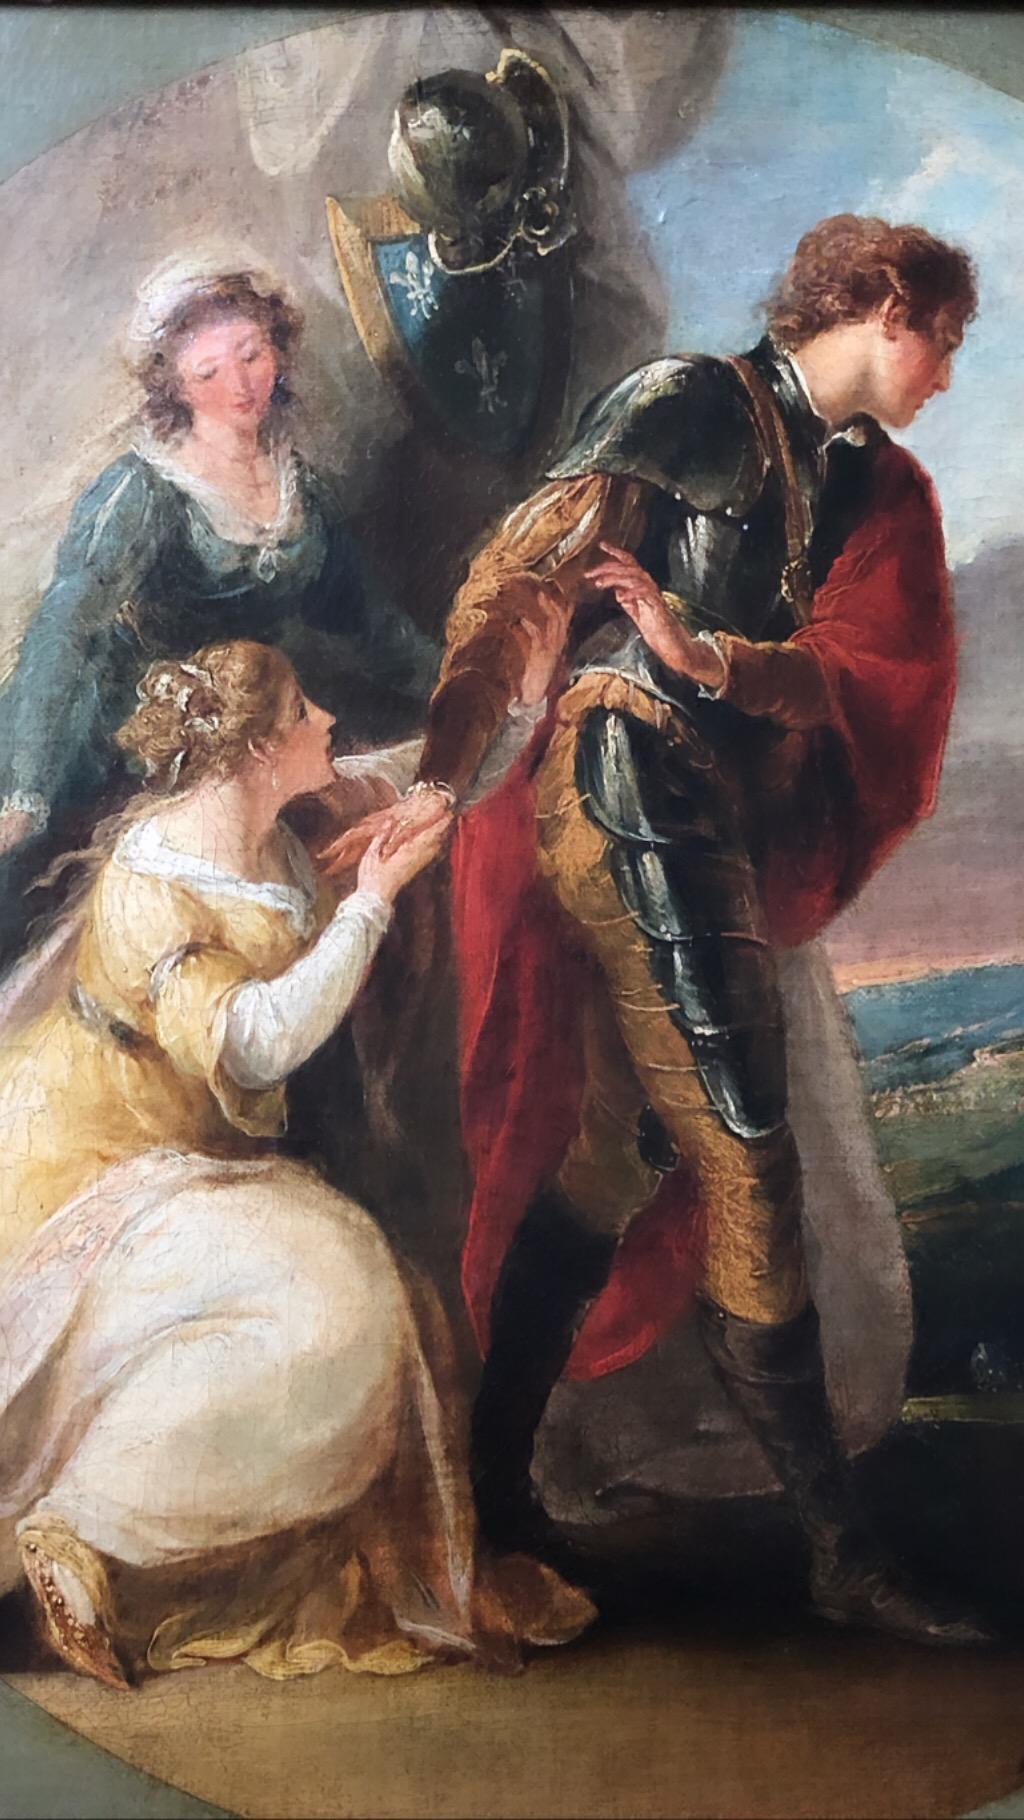 painting of knight and maiden